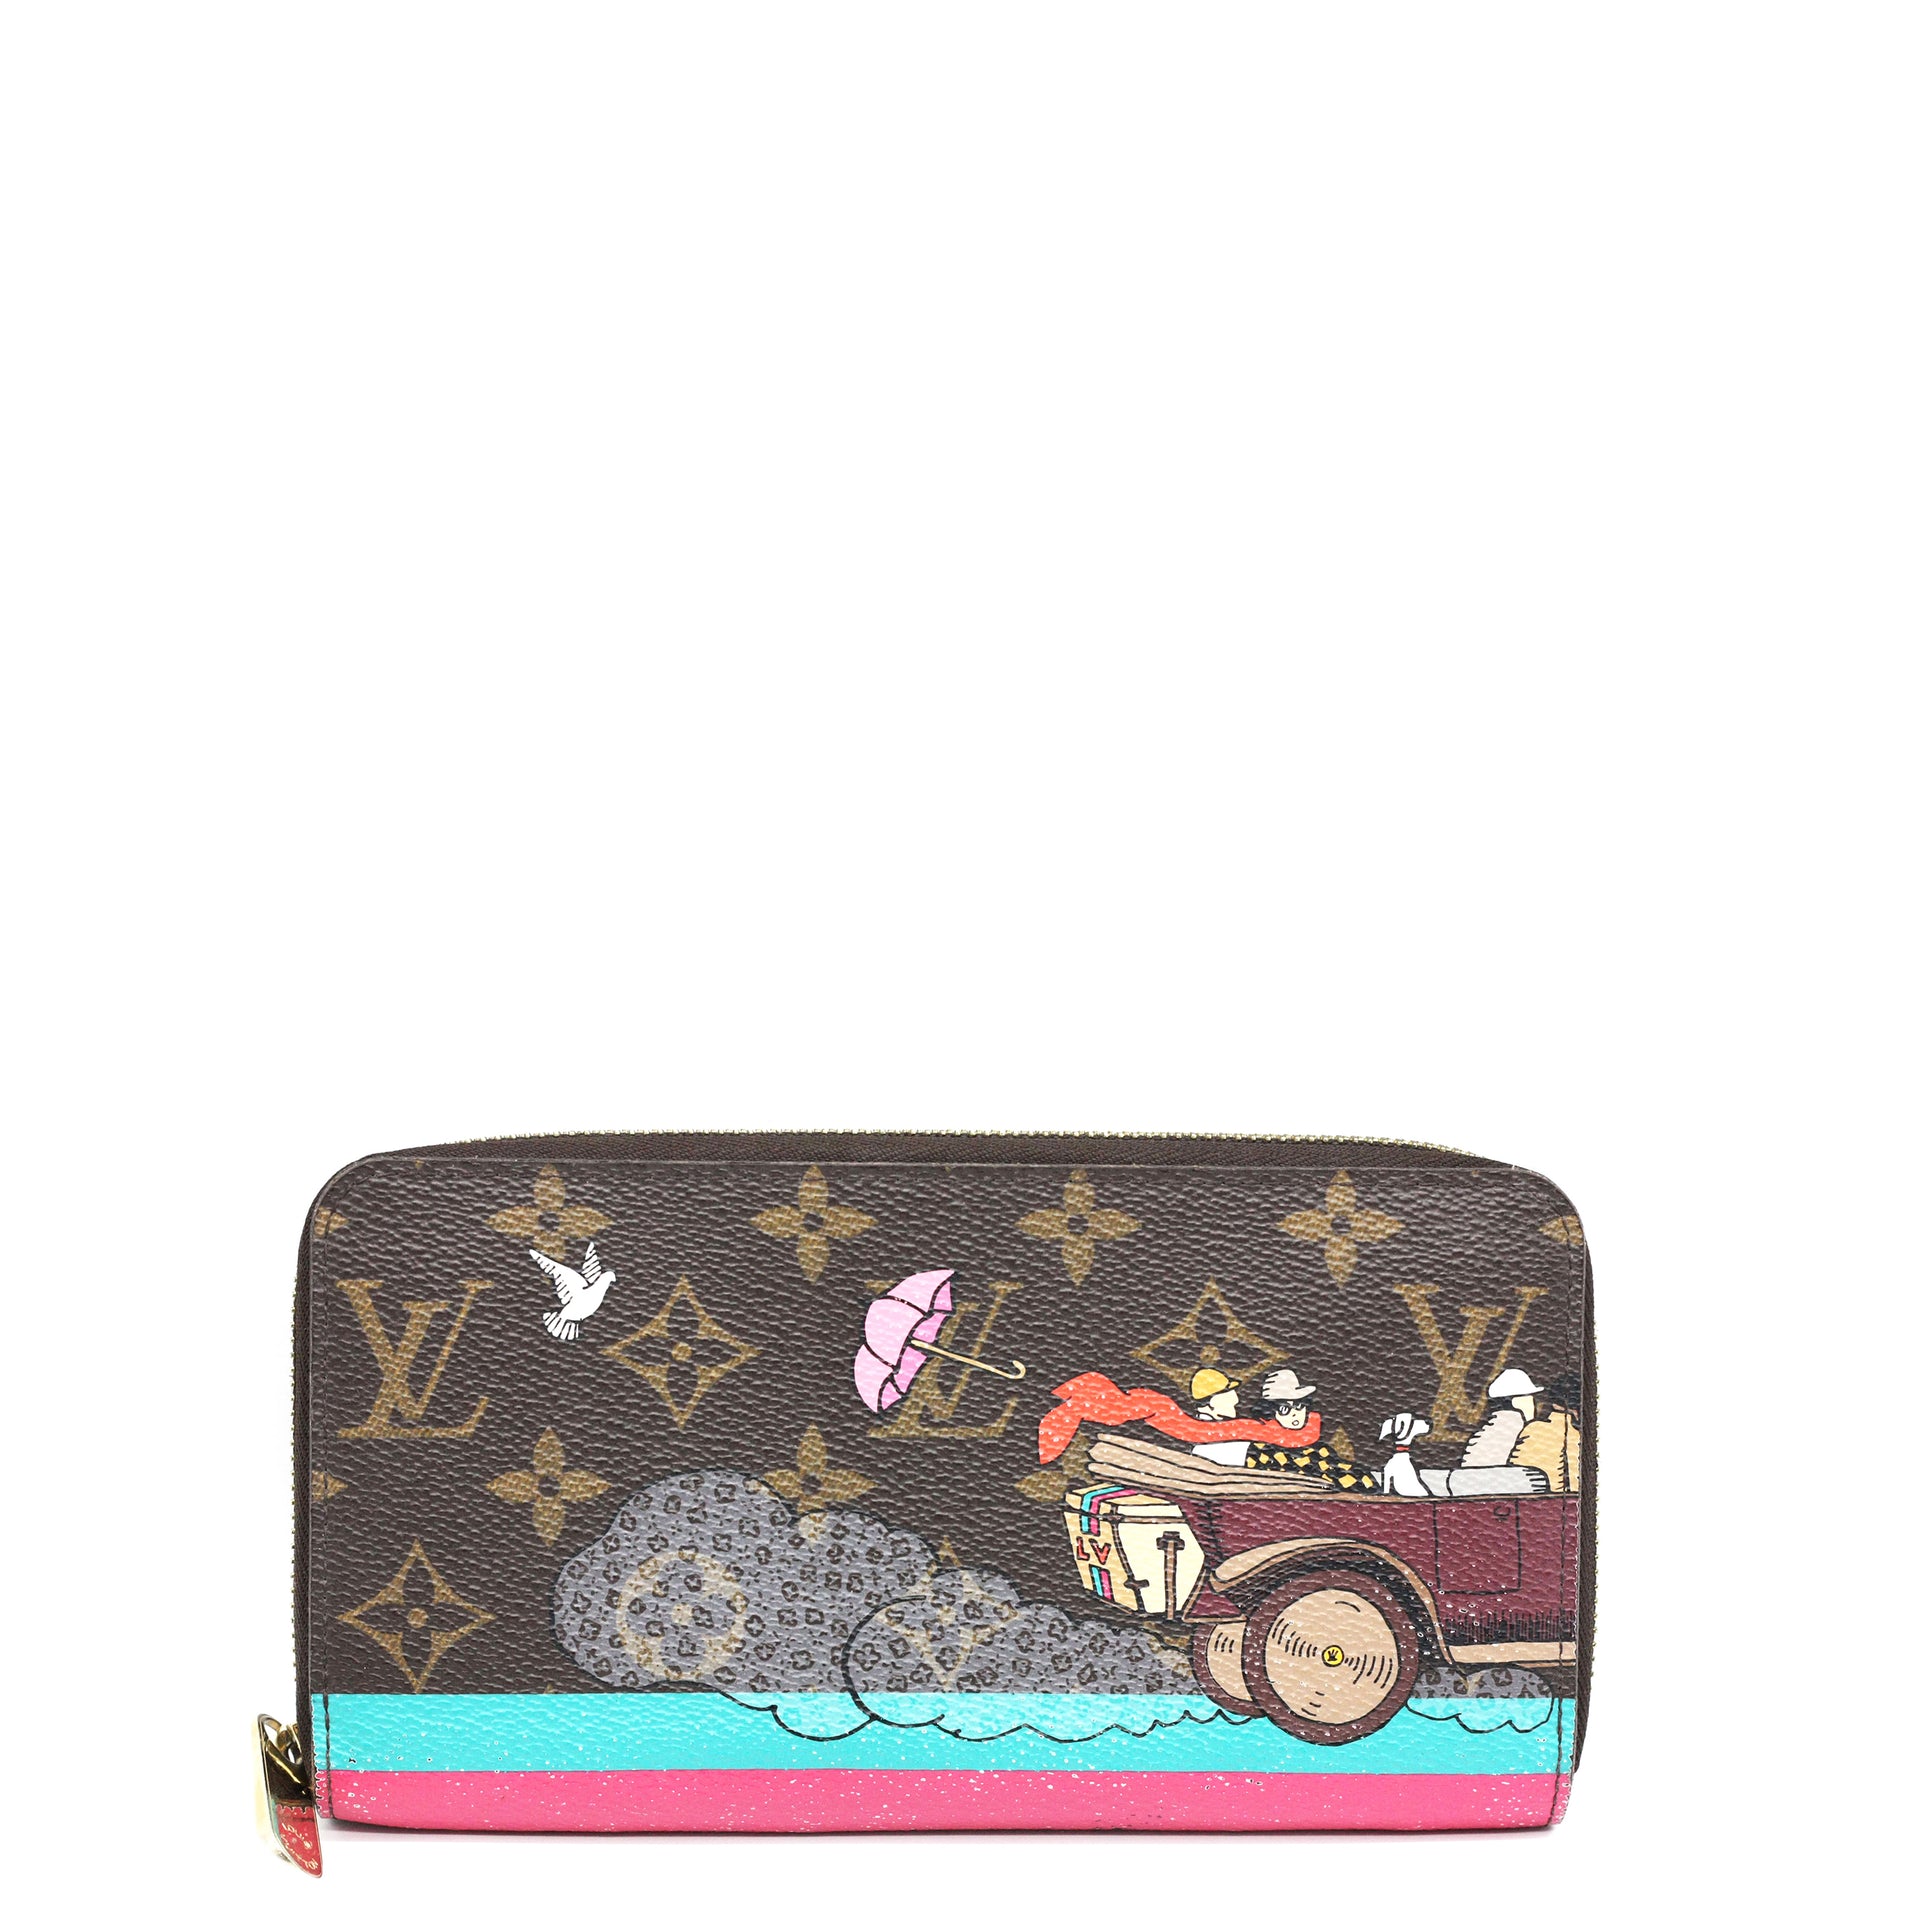 LV newest zippy compact wallet 2015 